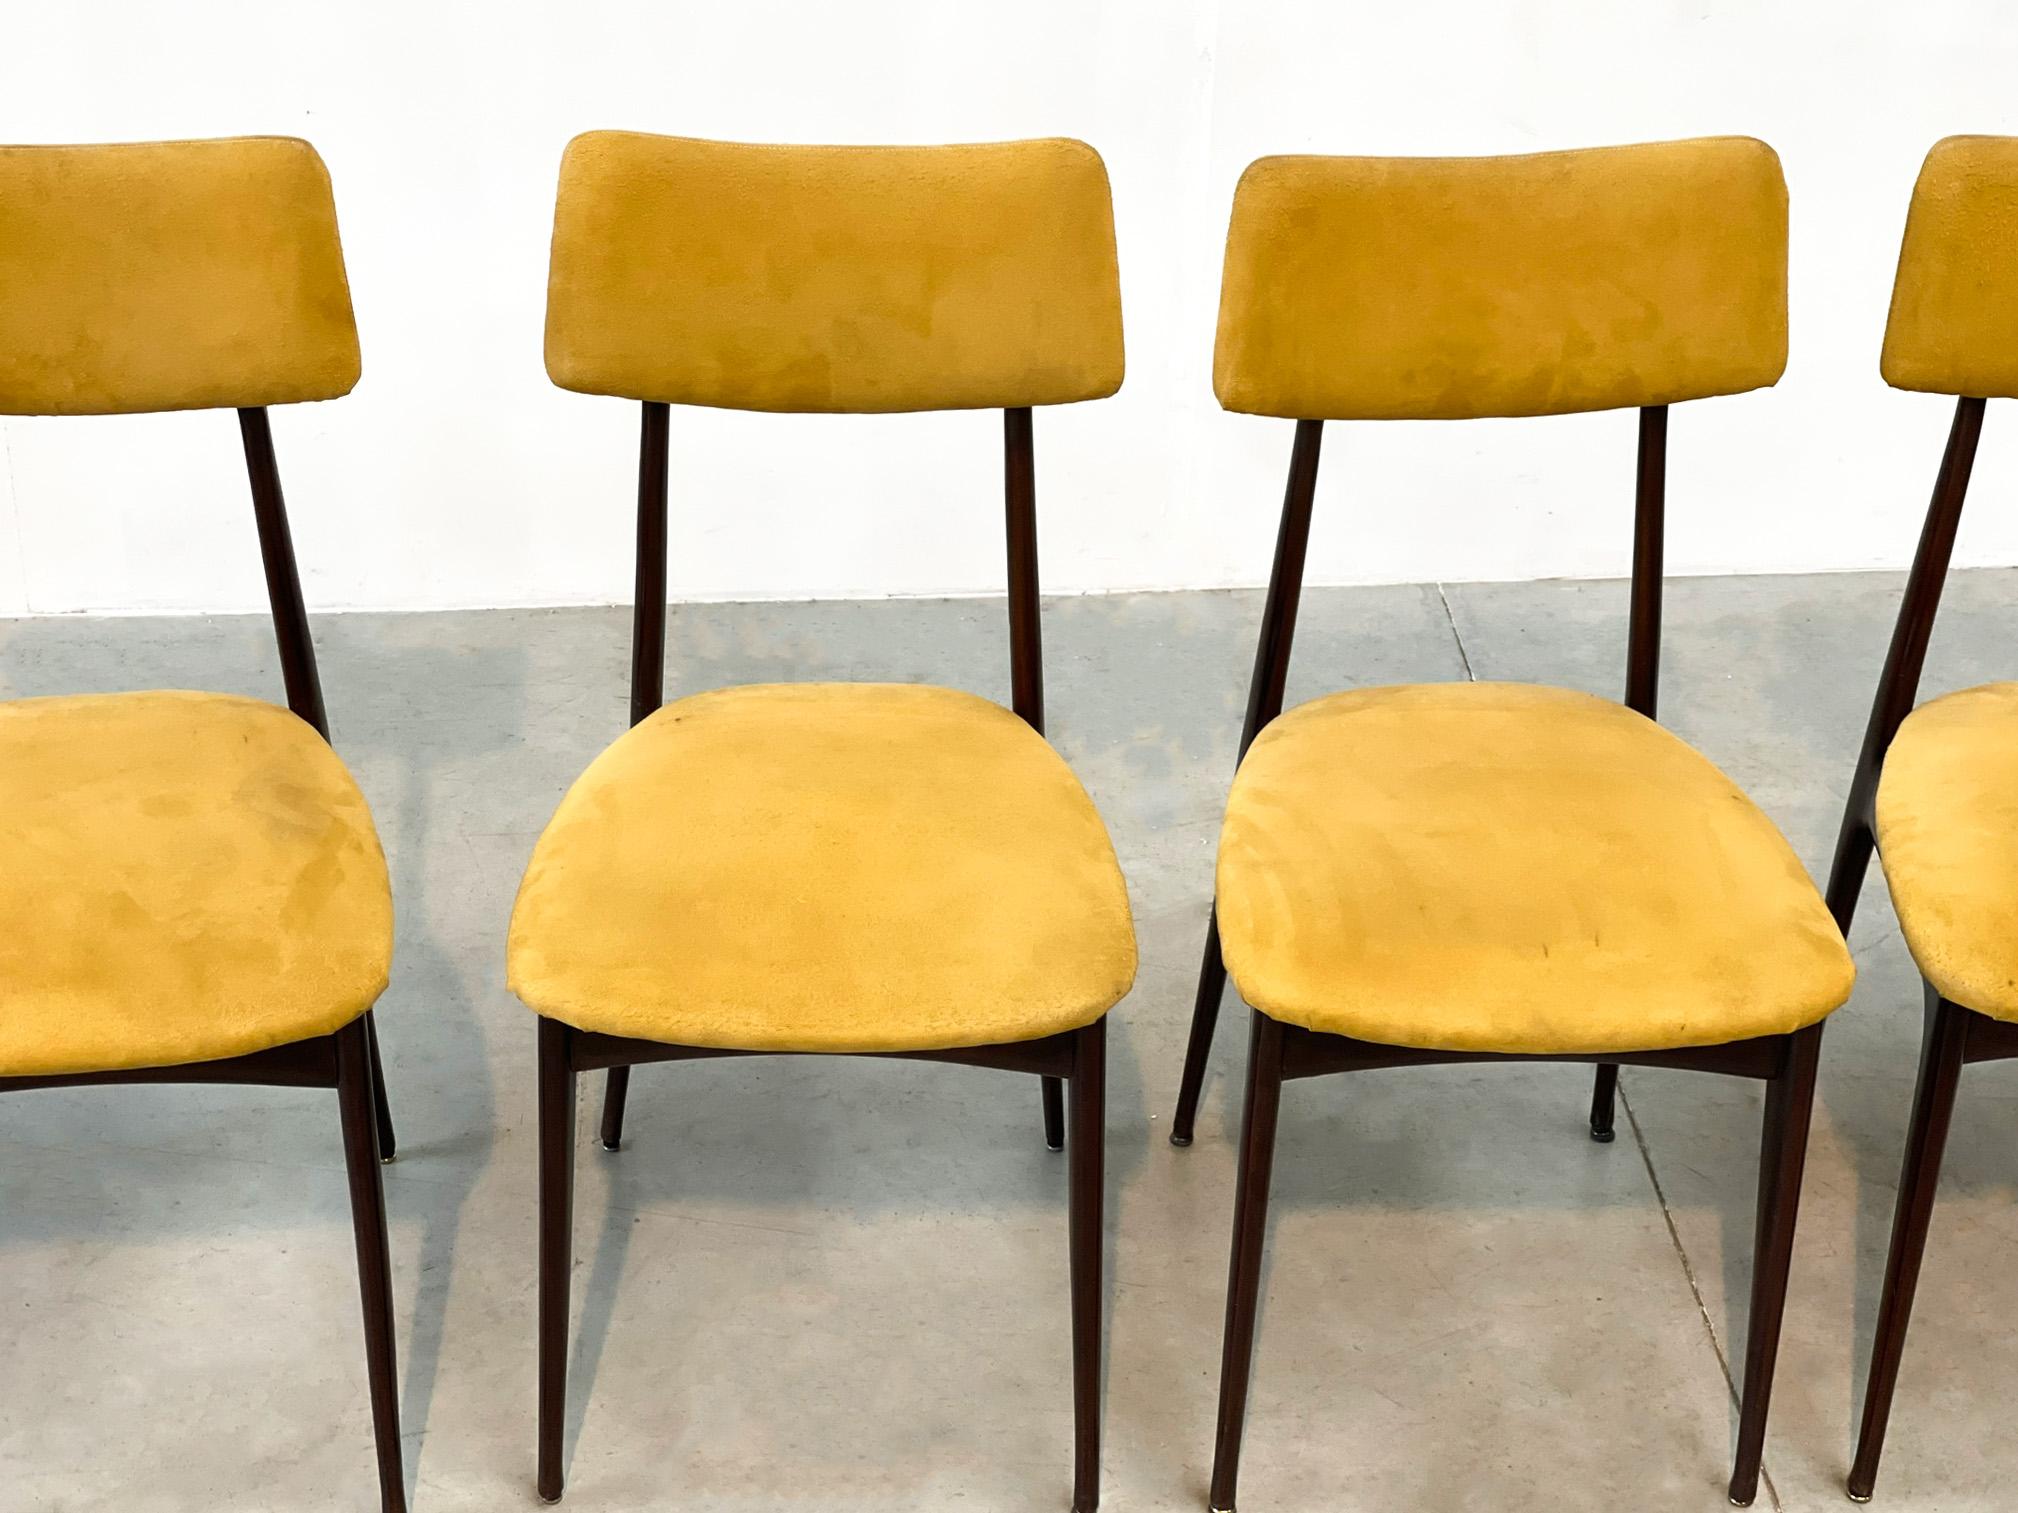 Elegant mid century italian dining chairs with rosewood frames and yellow suede upholstery.

The chairs are beautifully made and with real craftsmenship

Good condition

1950s - Italy

Dimensions:
Height: 74cm/29.13